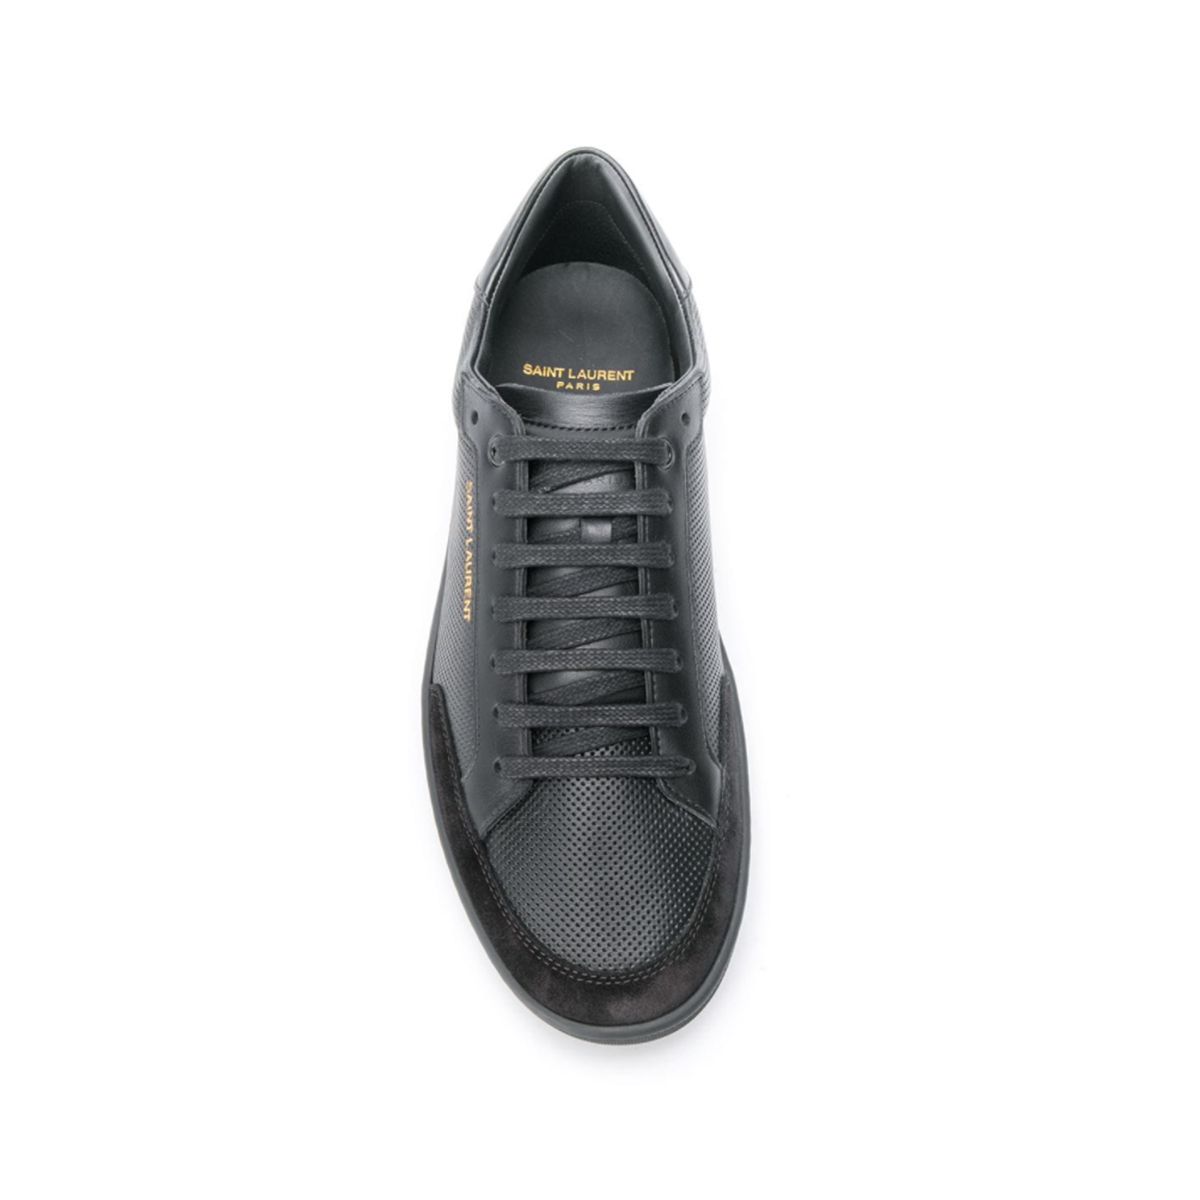 Court Classic SL/10 Low-Top Sneakers